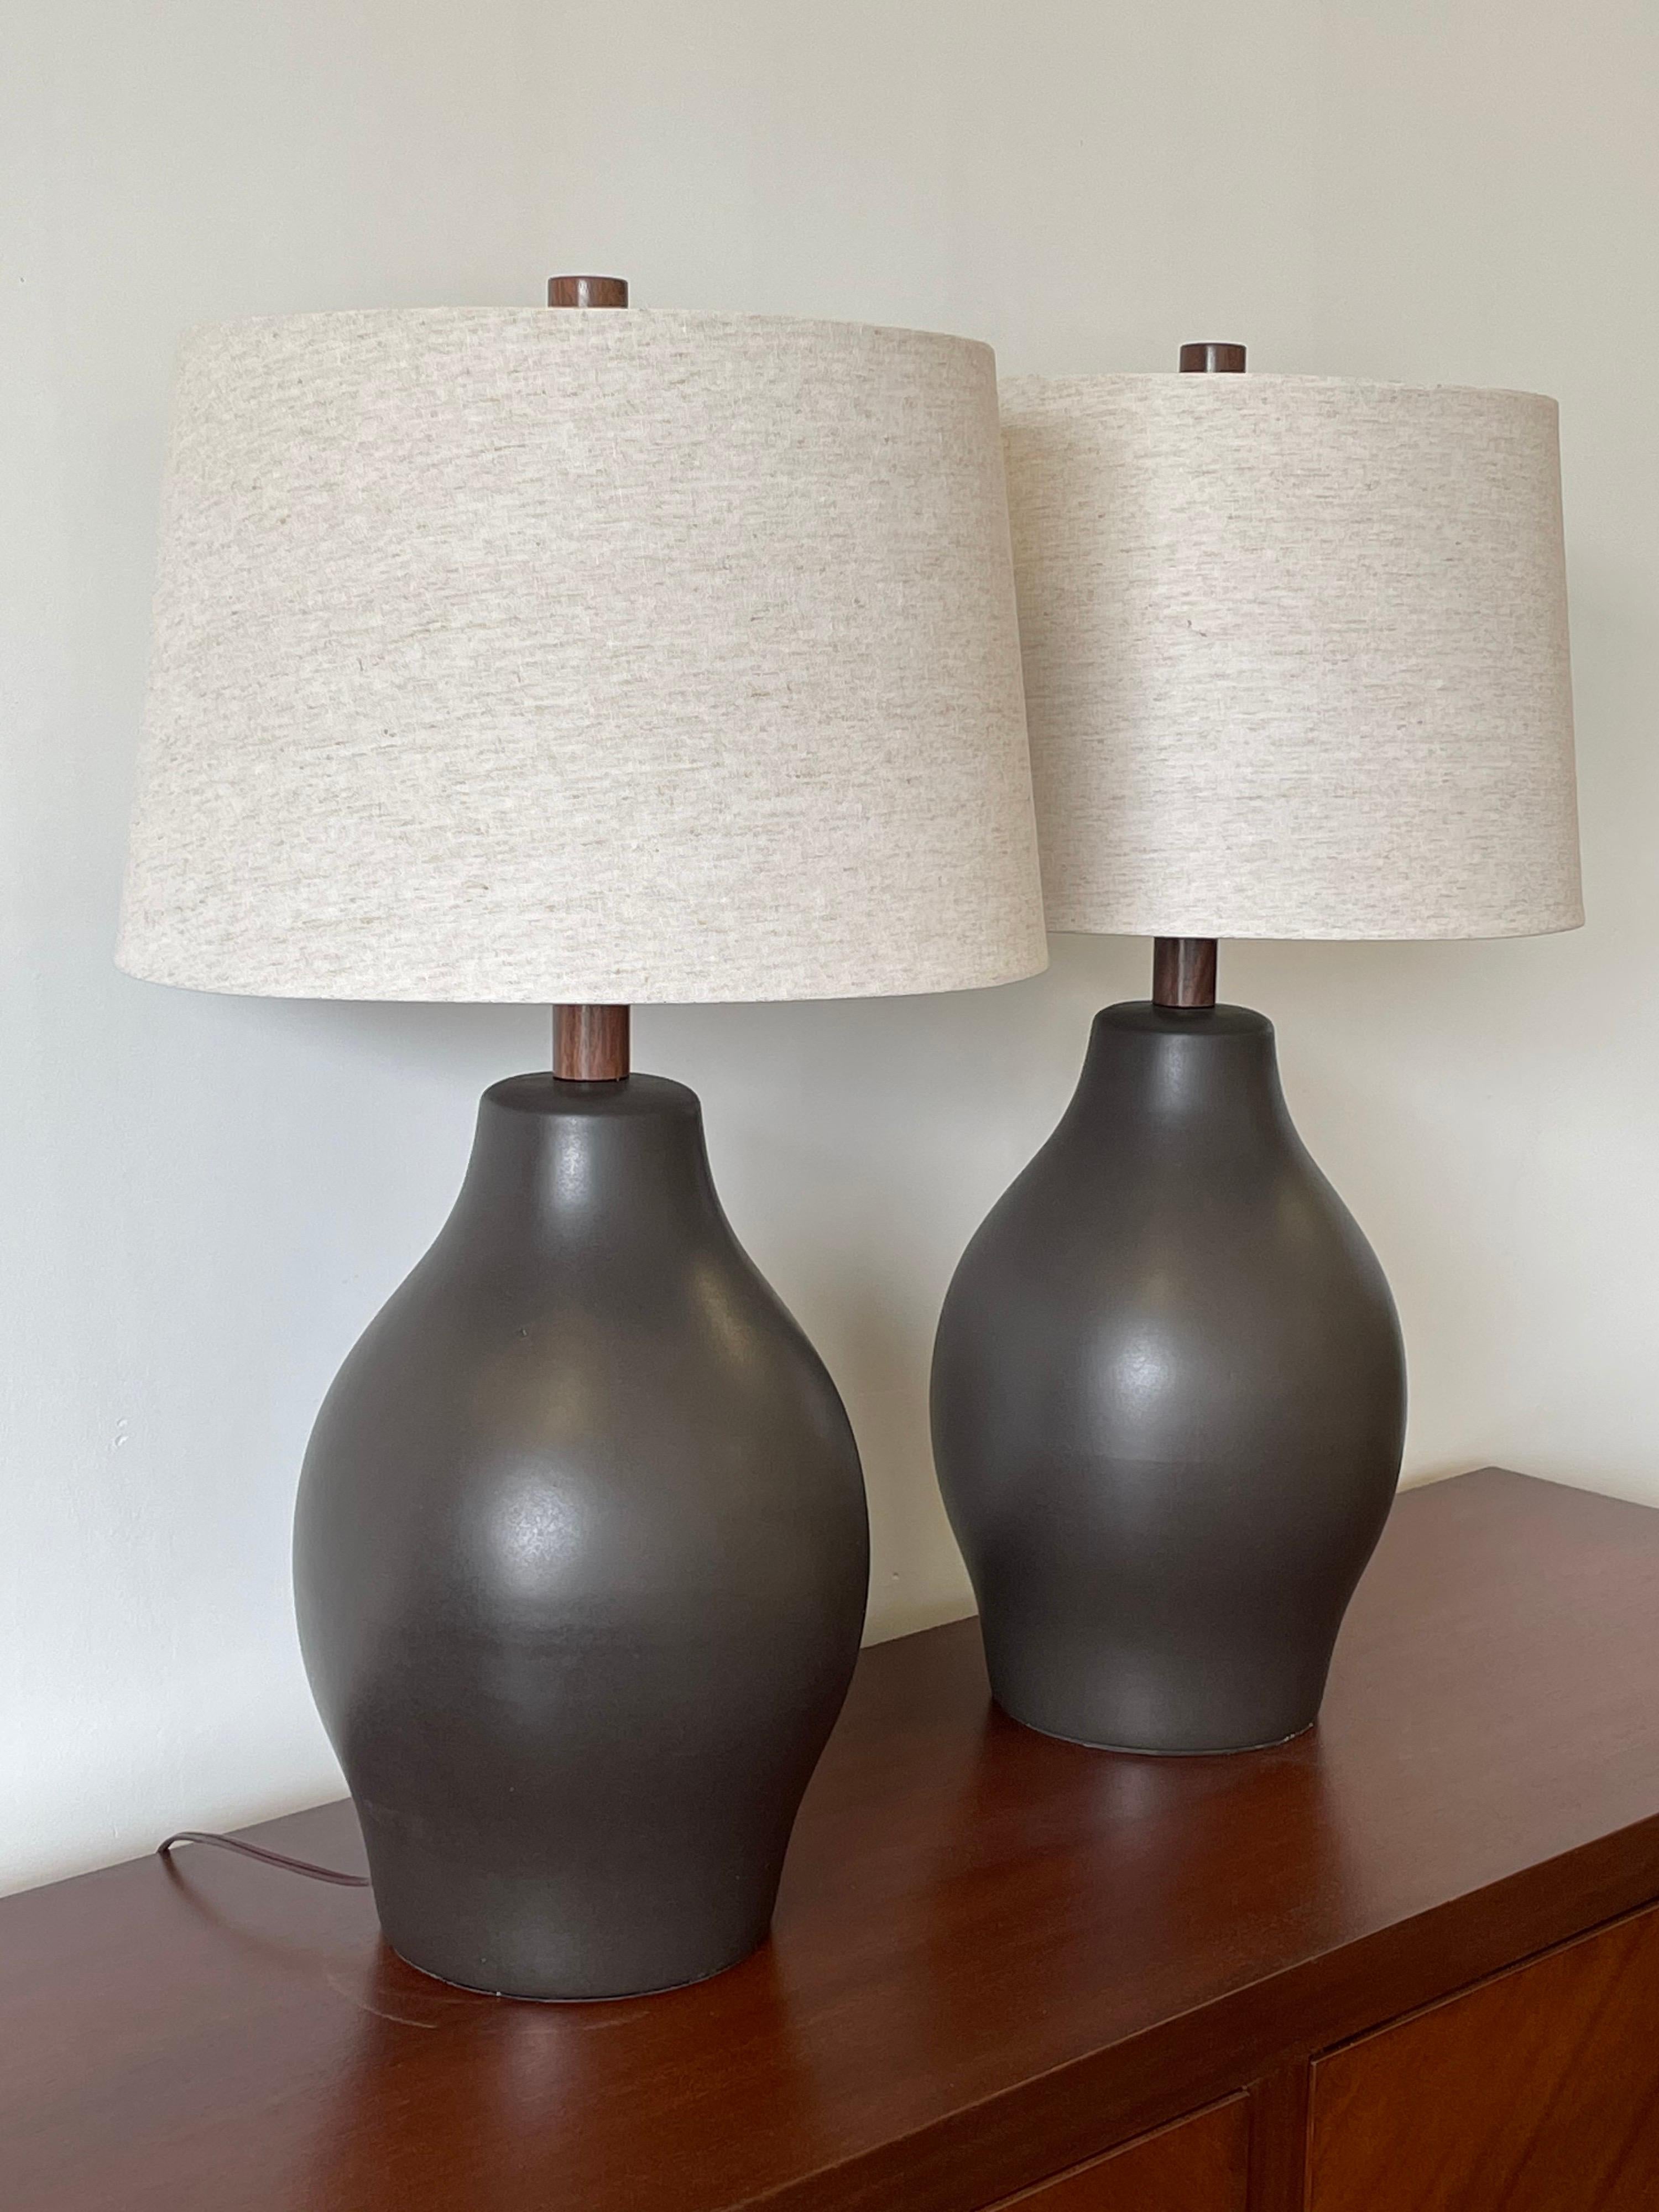 Large pair of lamps by ceramicist duo Jane and Gordon Martz for Marshall Studios. Wonderful matte gunmetal color bulbous form.

These lamps were sourced as “new old stock” ceramic lamp bases. They are authentic Martz bases that hadn't yet been